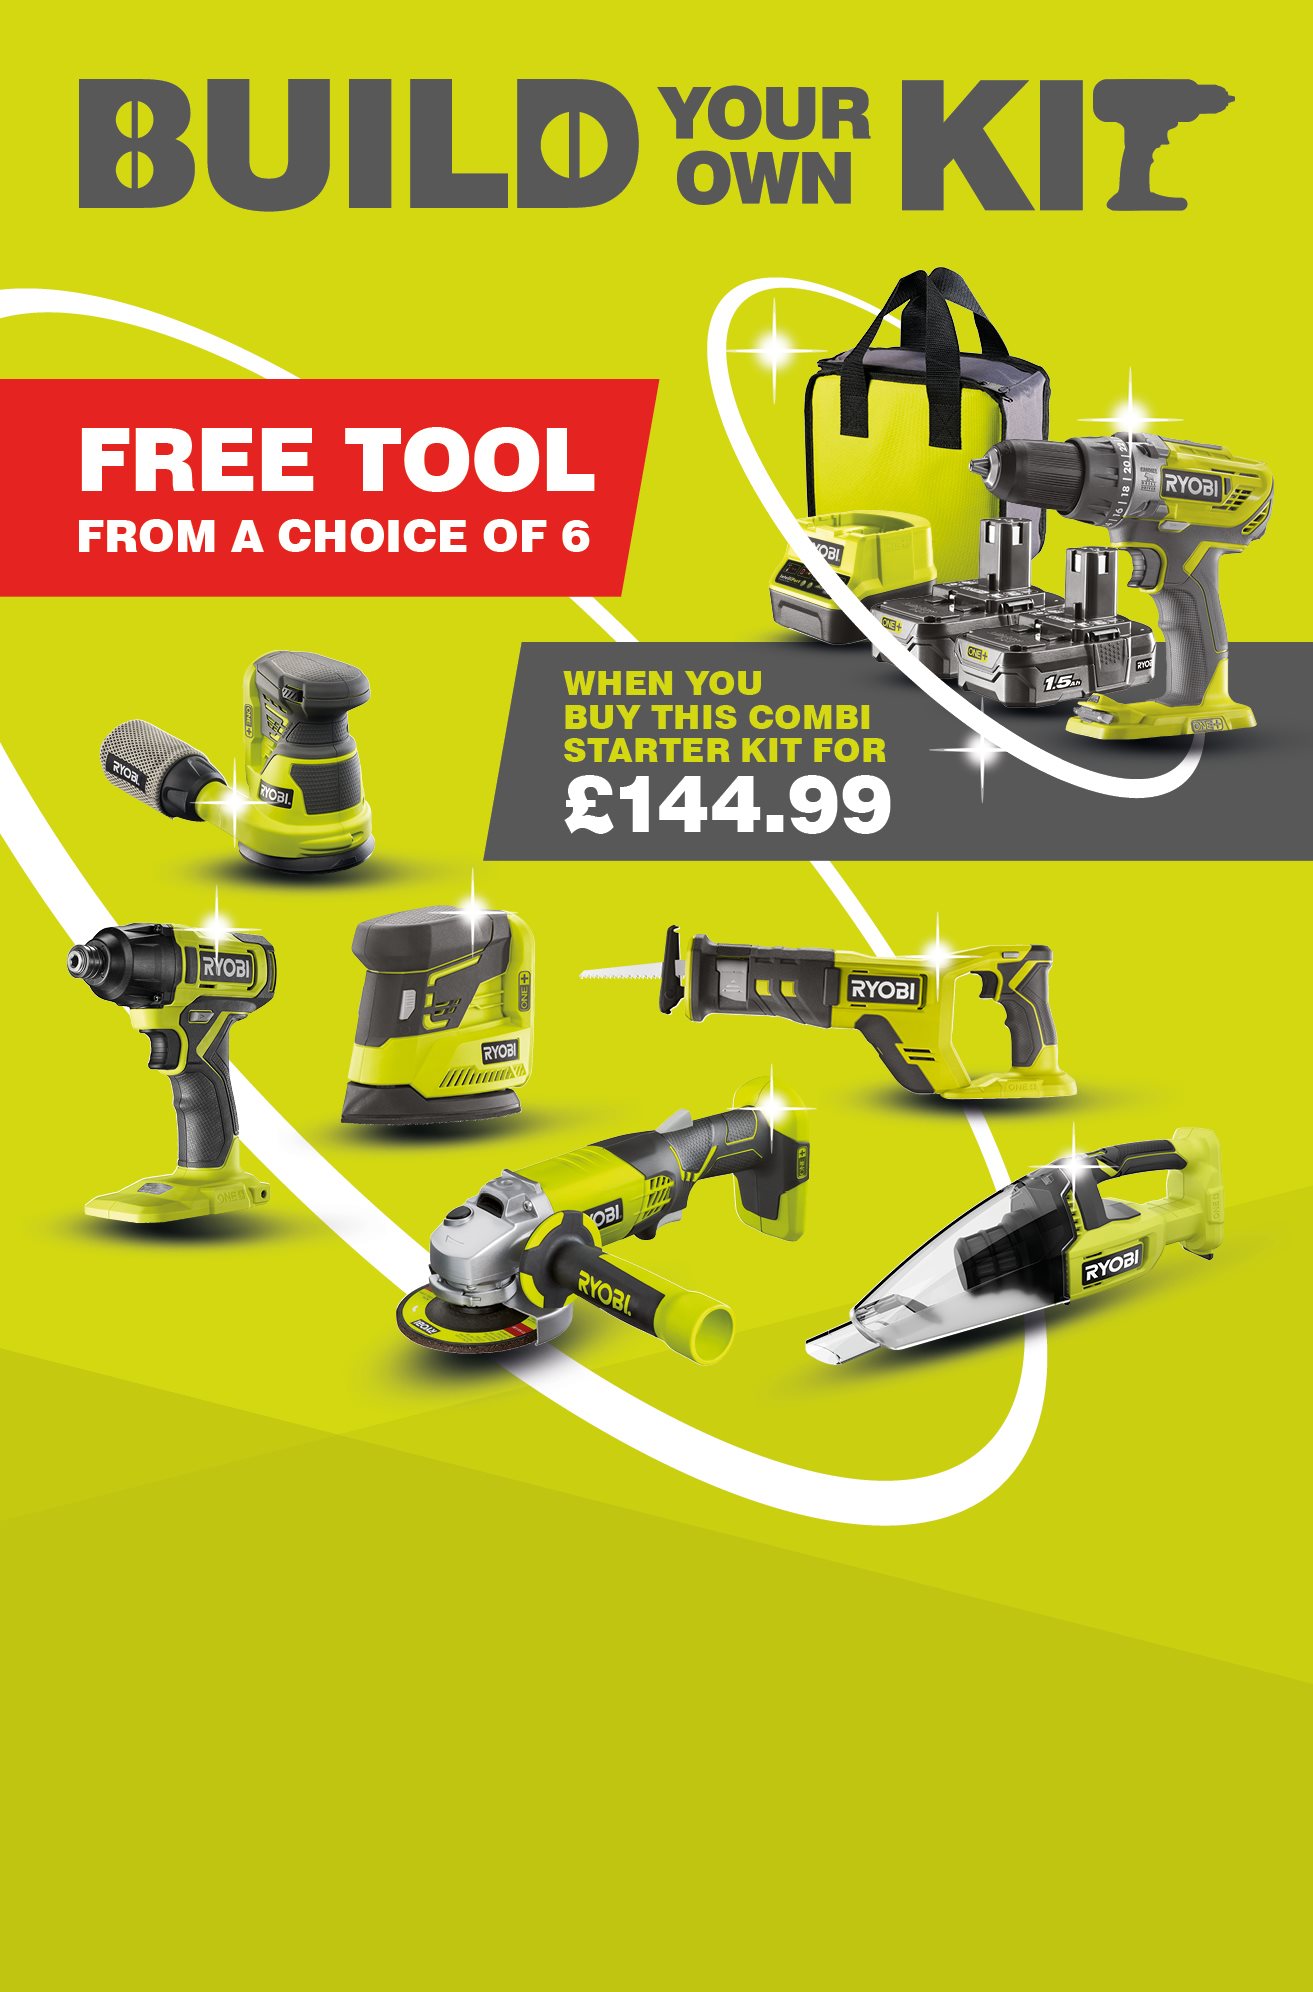 SPECIAL OFFER – BUILD YOUR OWN DIY SET